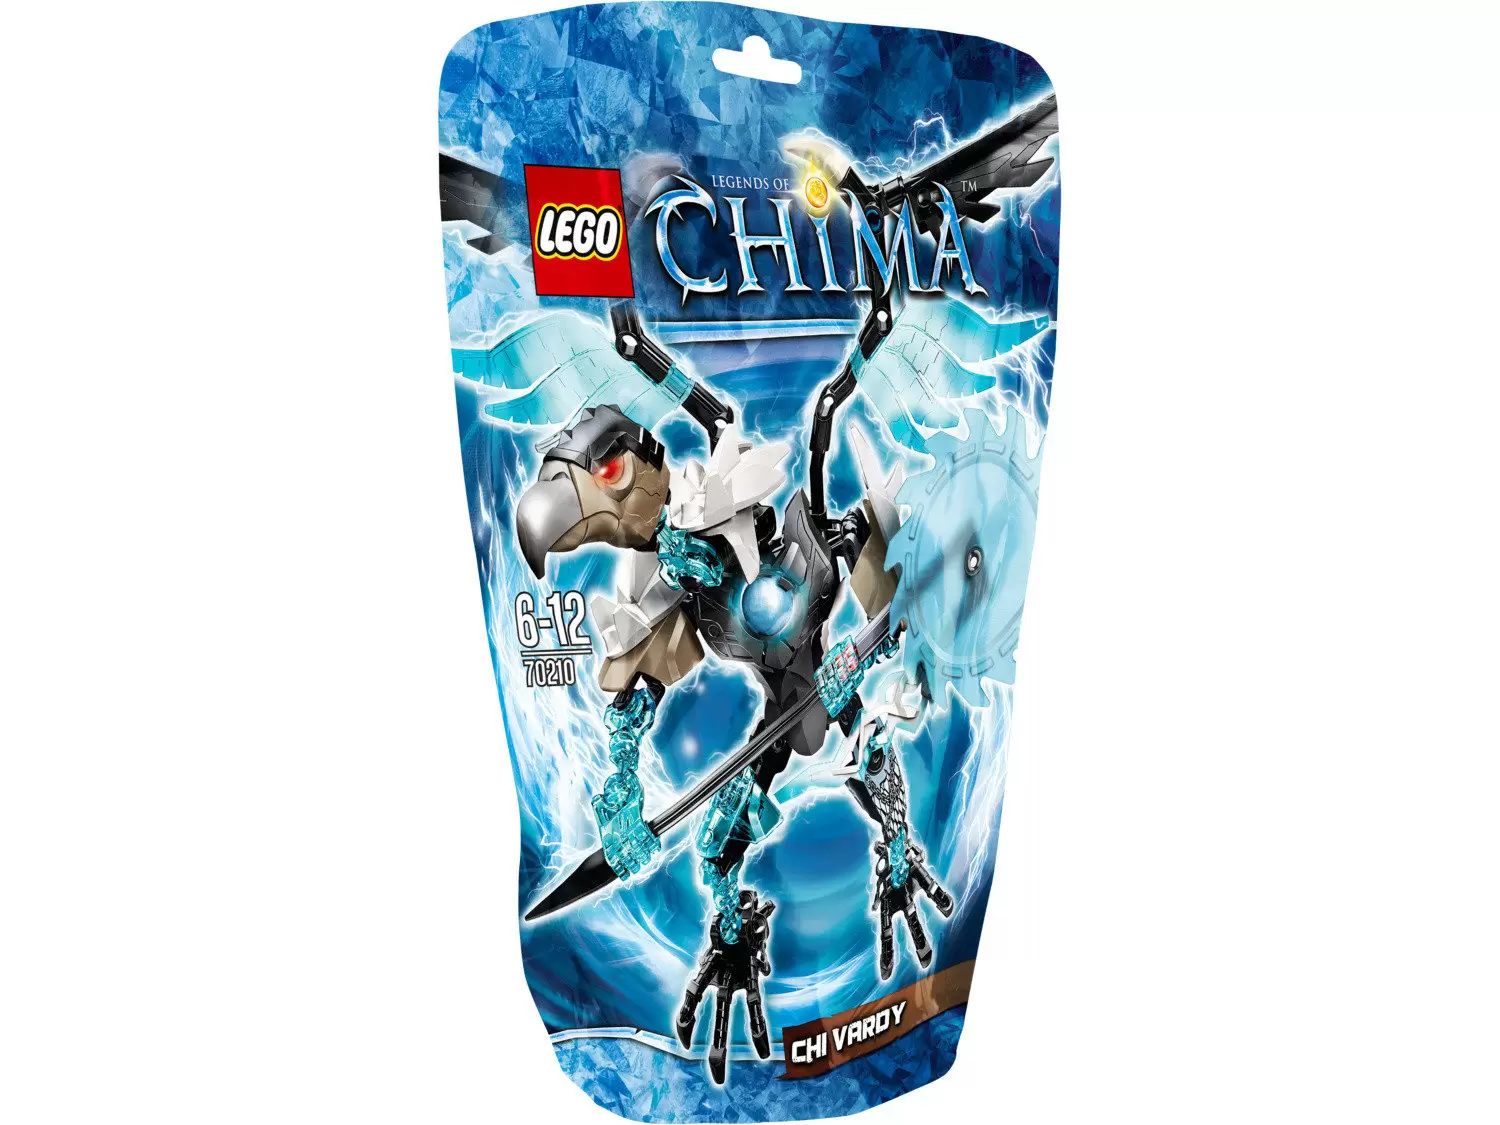 LEGO Legends of Chima - Chi Vardy